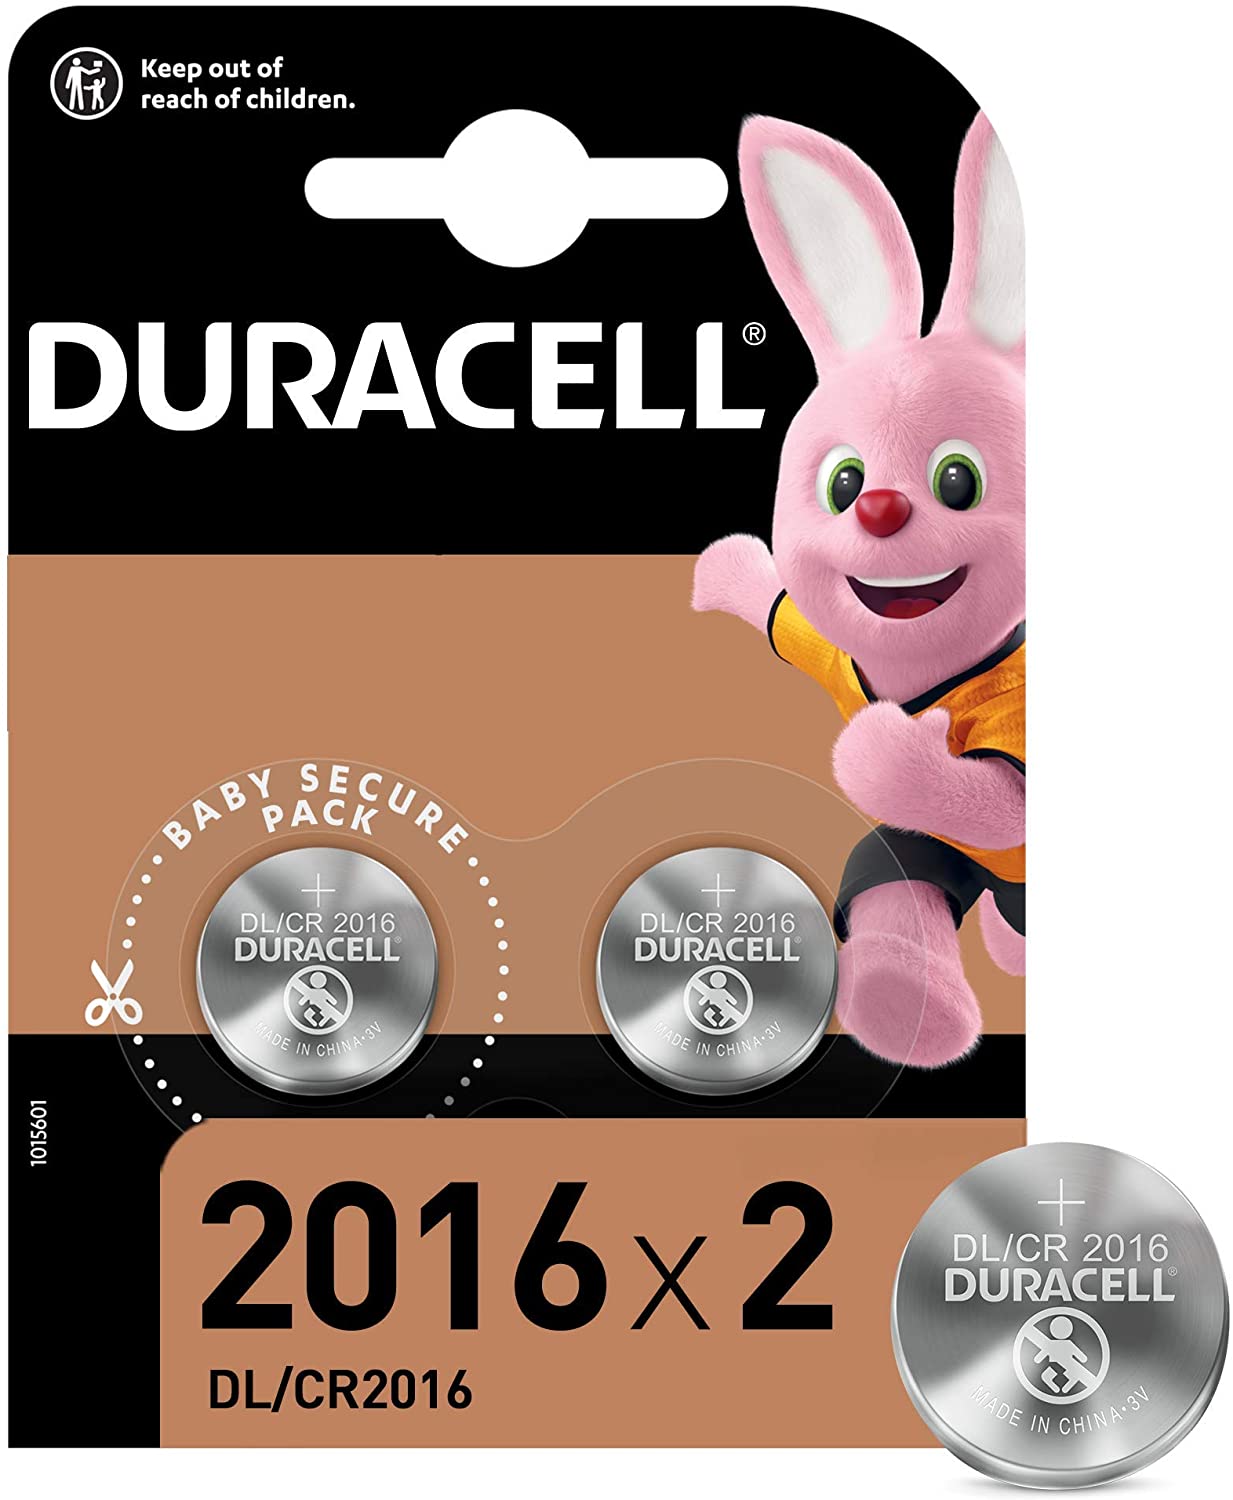 Duracell Pack de 2 Piles Bouton Lithium DL2016 3V - Baby Secure Technology